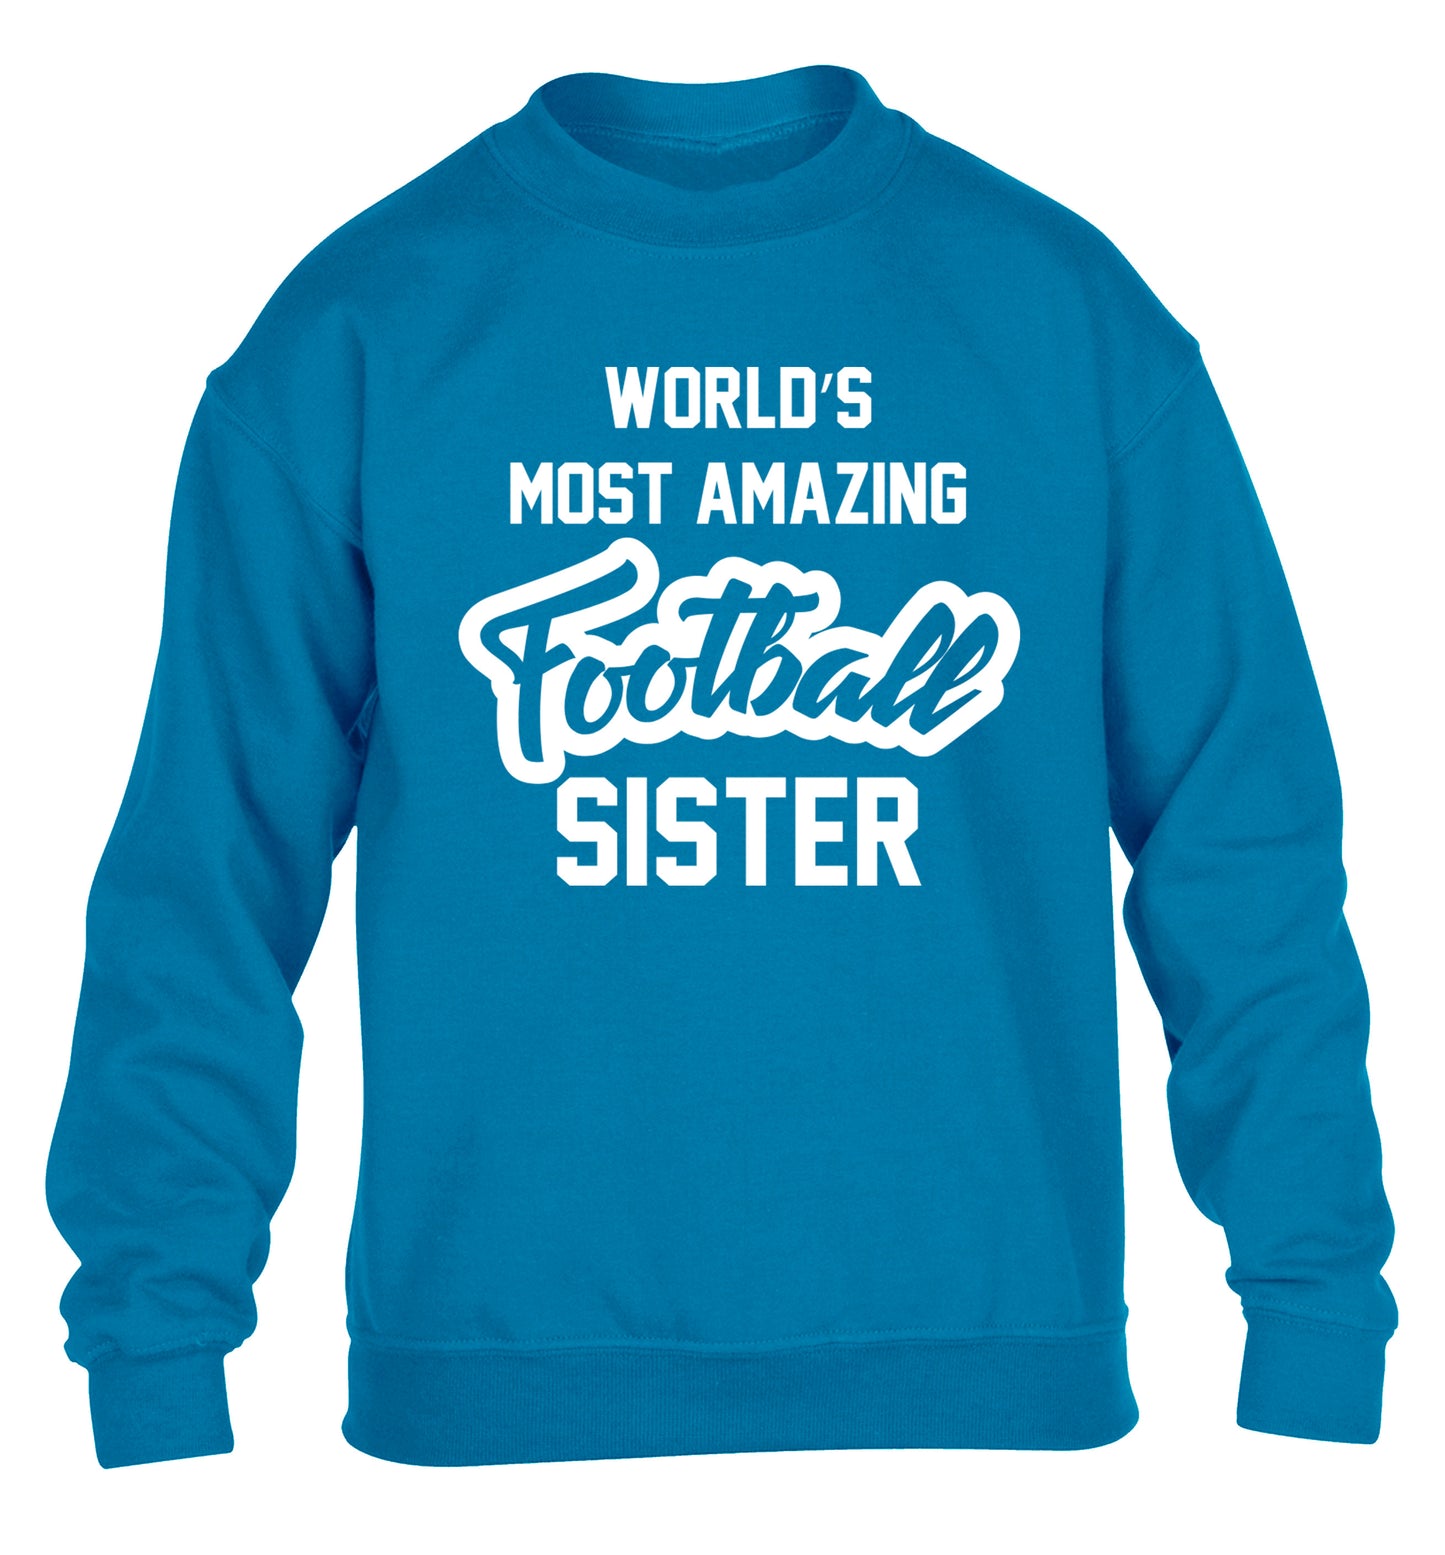 Worlds most amazing football sister children's blue sweater 12-14 Years